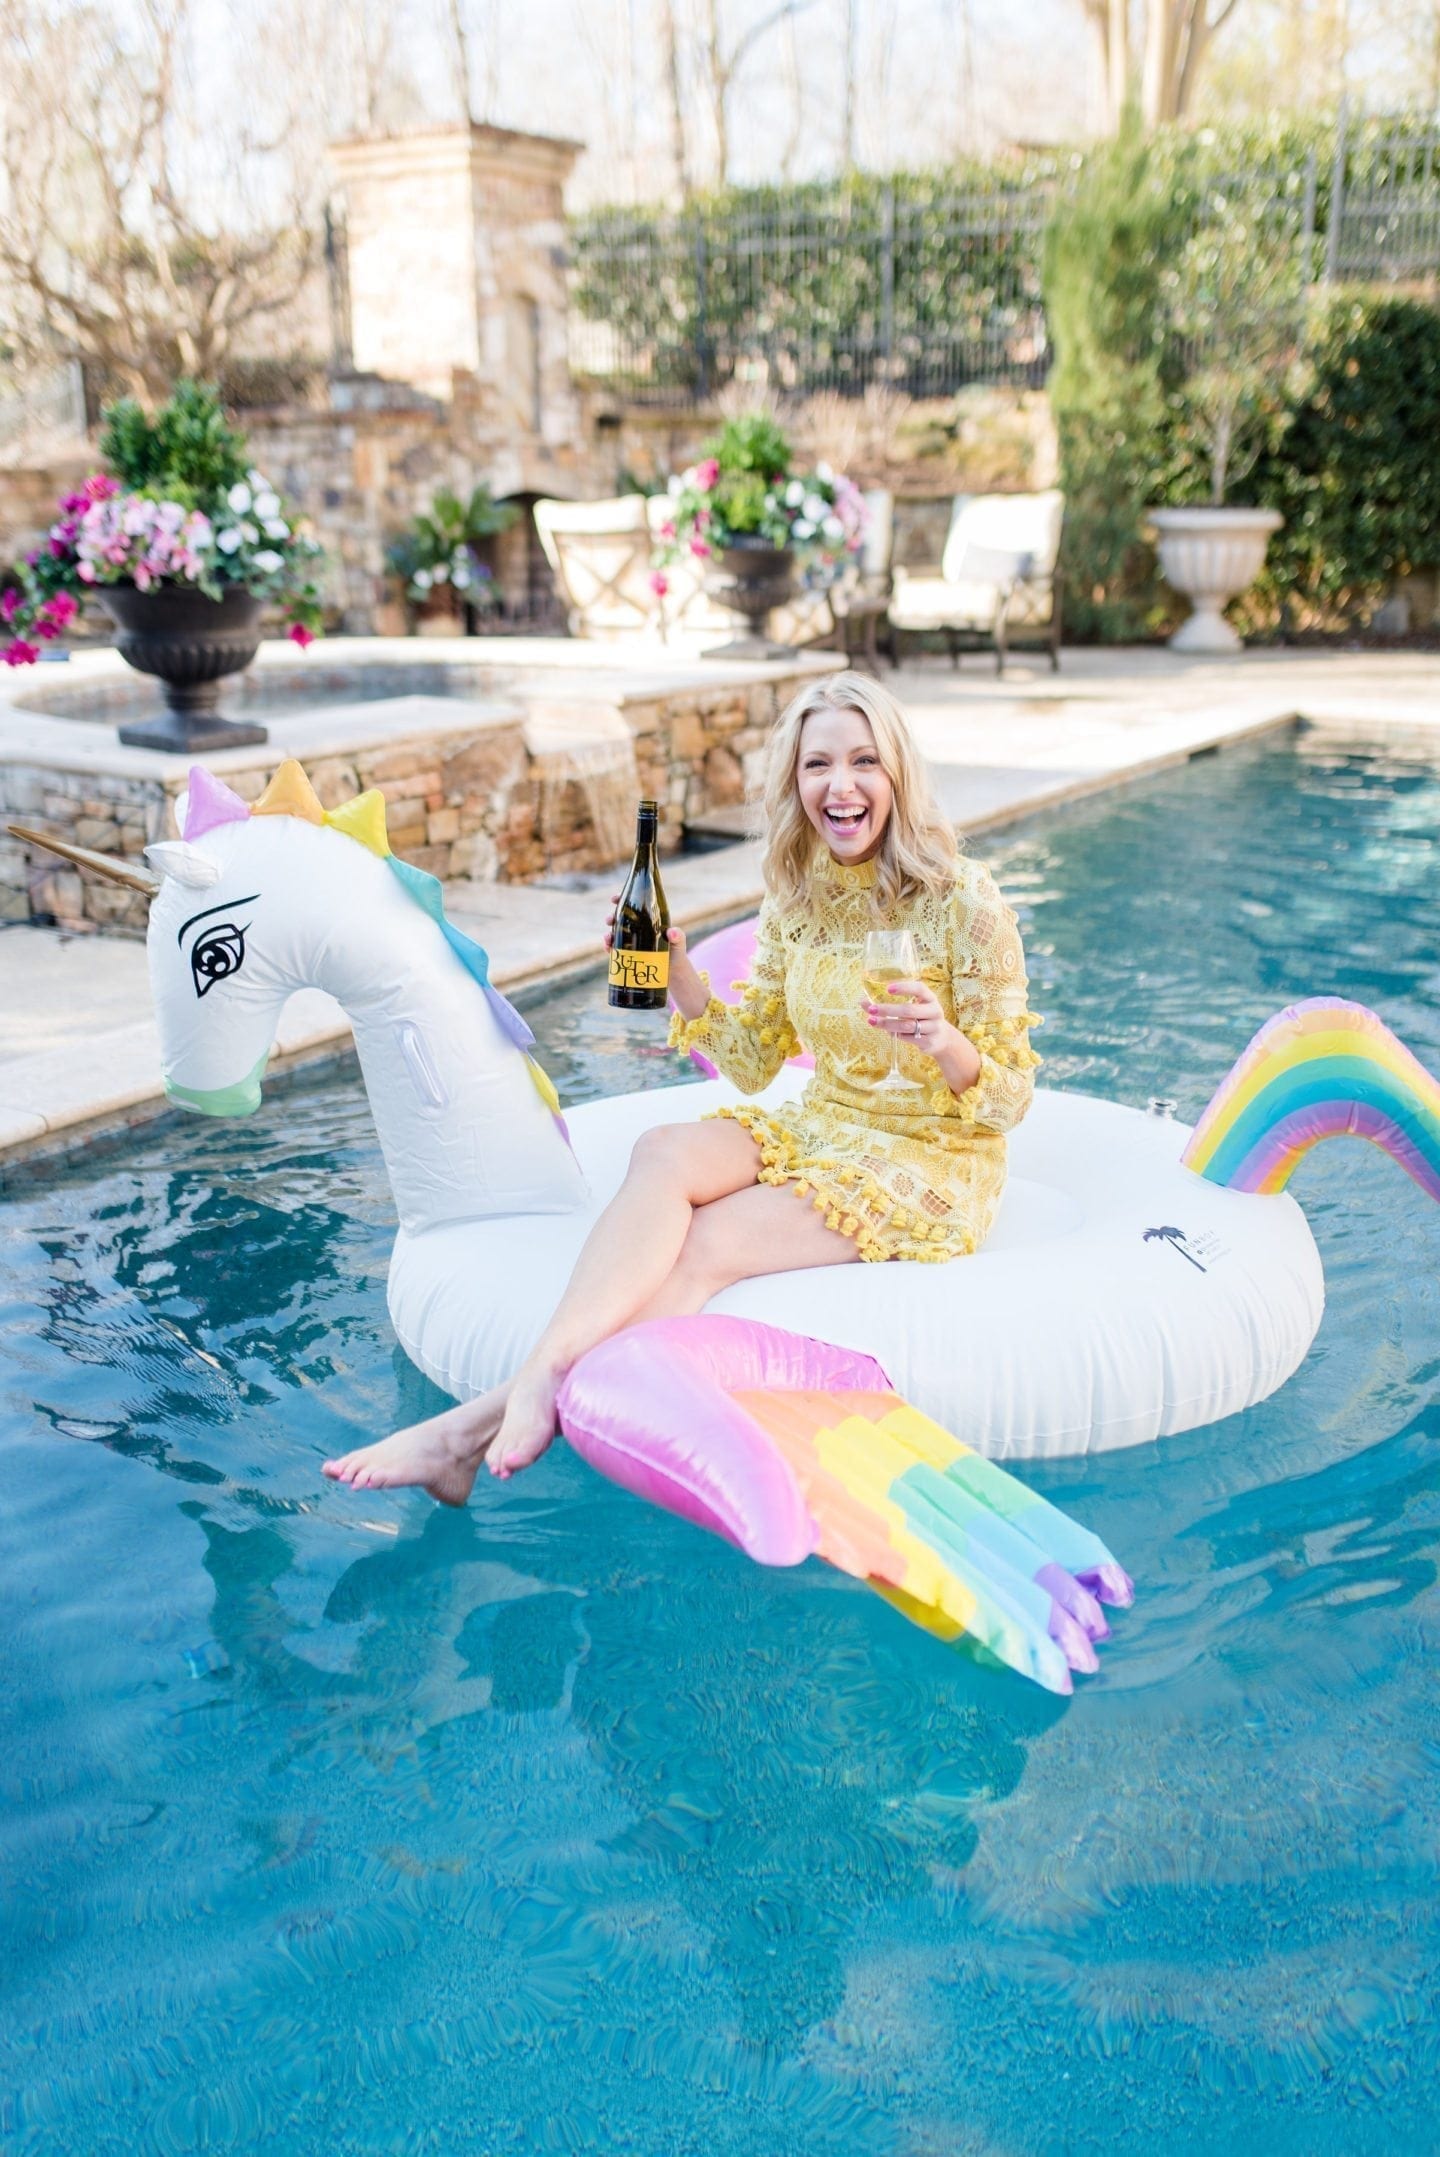 Butter Wine poolside! Throw a fun pool party with these top tips on how to have fun with girls!